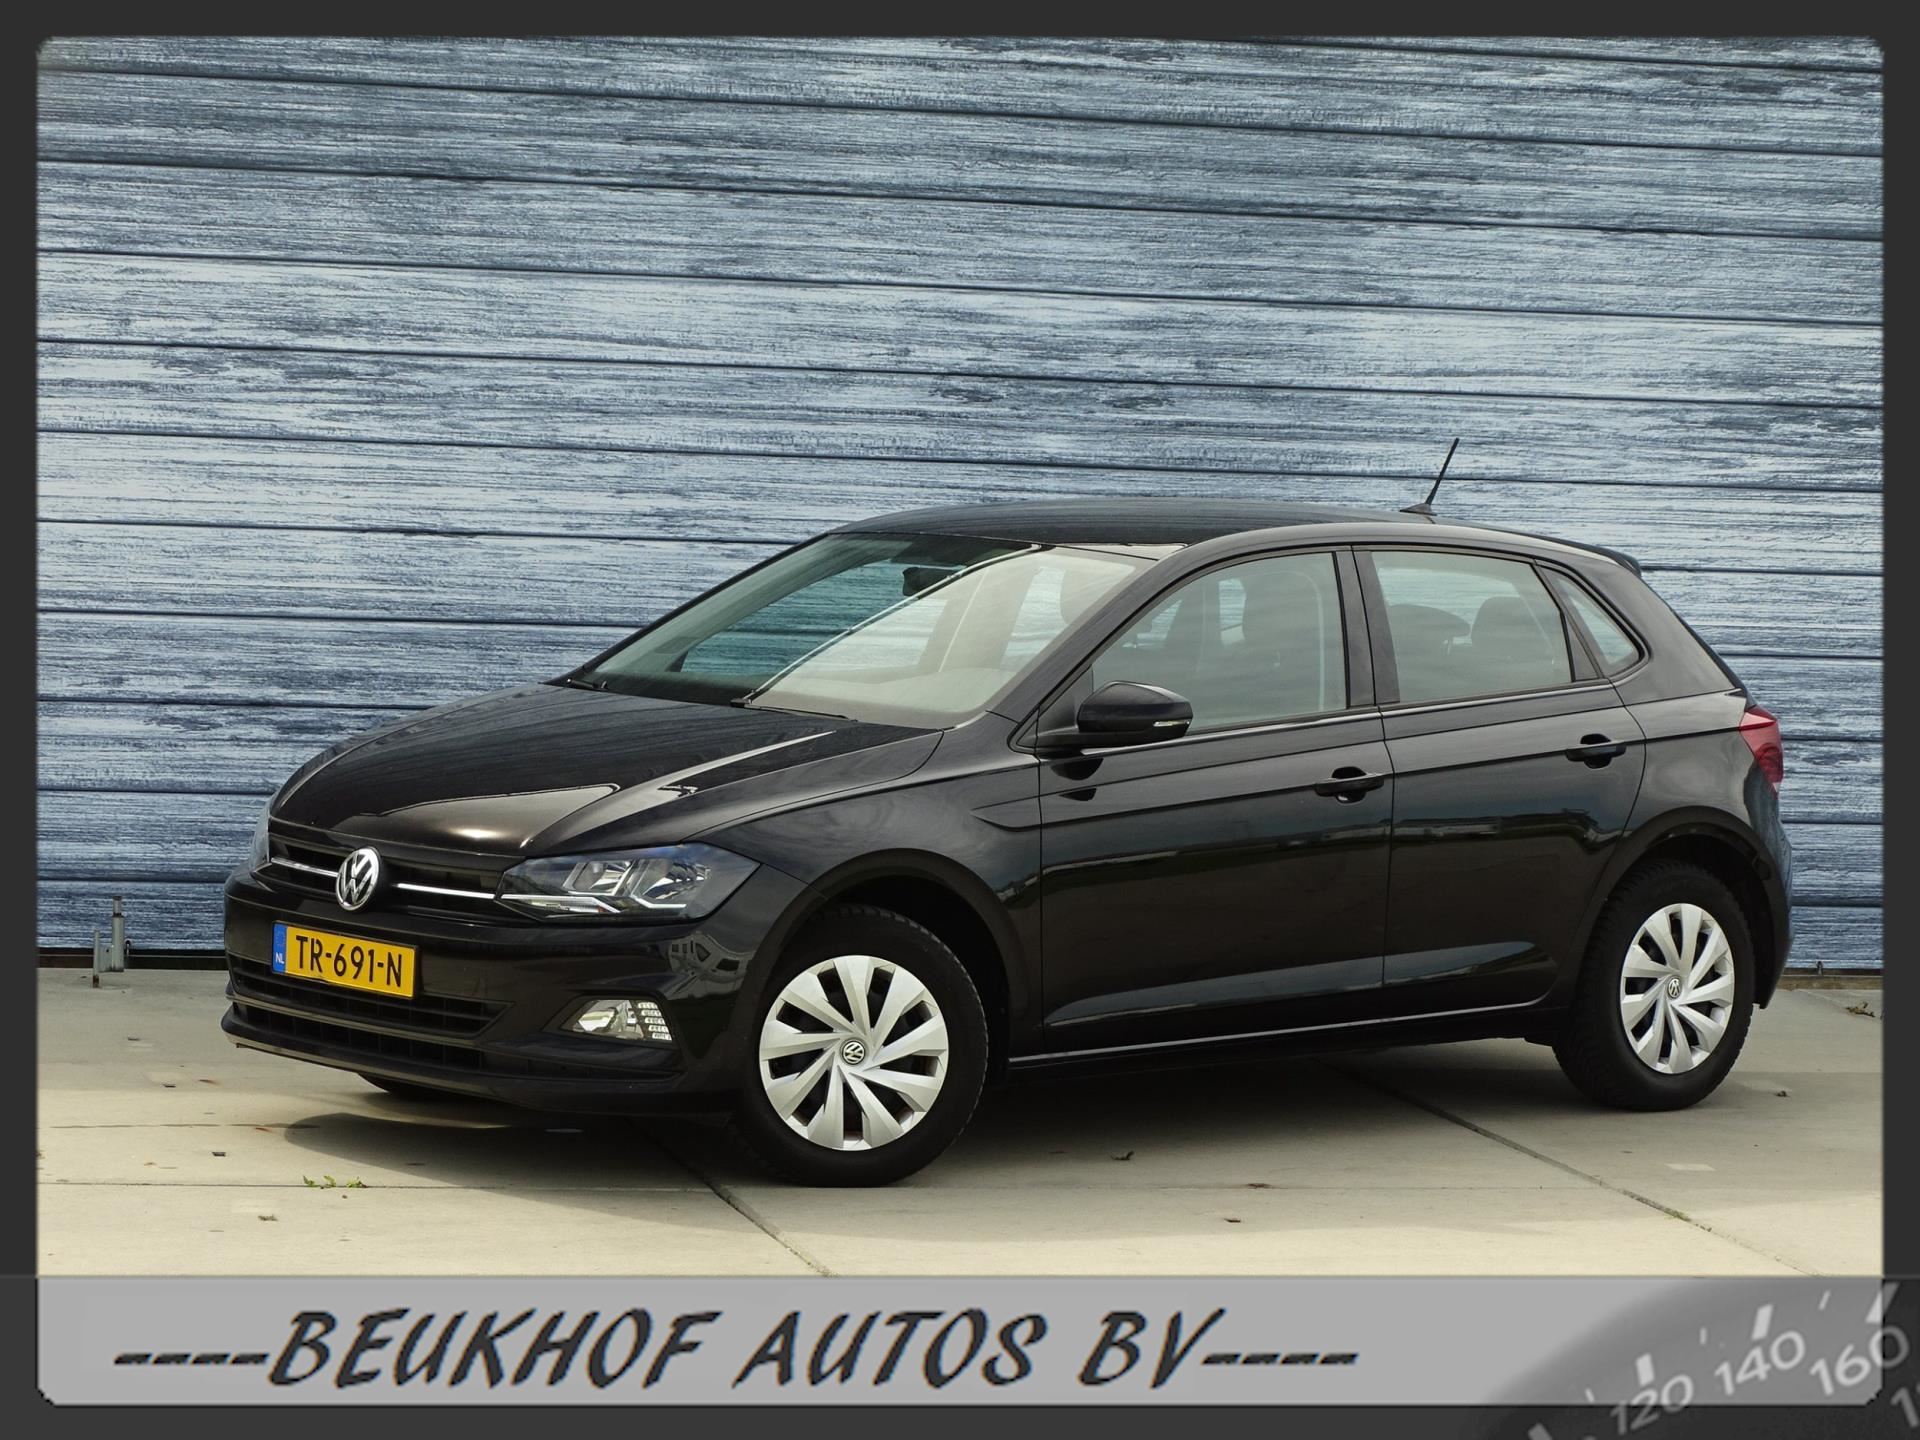 Volkswagen Polo occasion - Beukhof Auto's B.V.